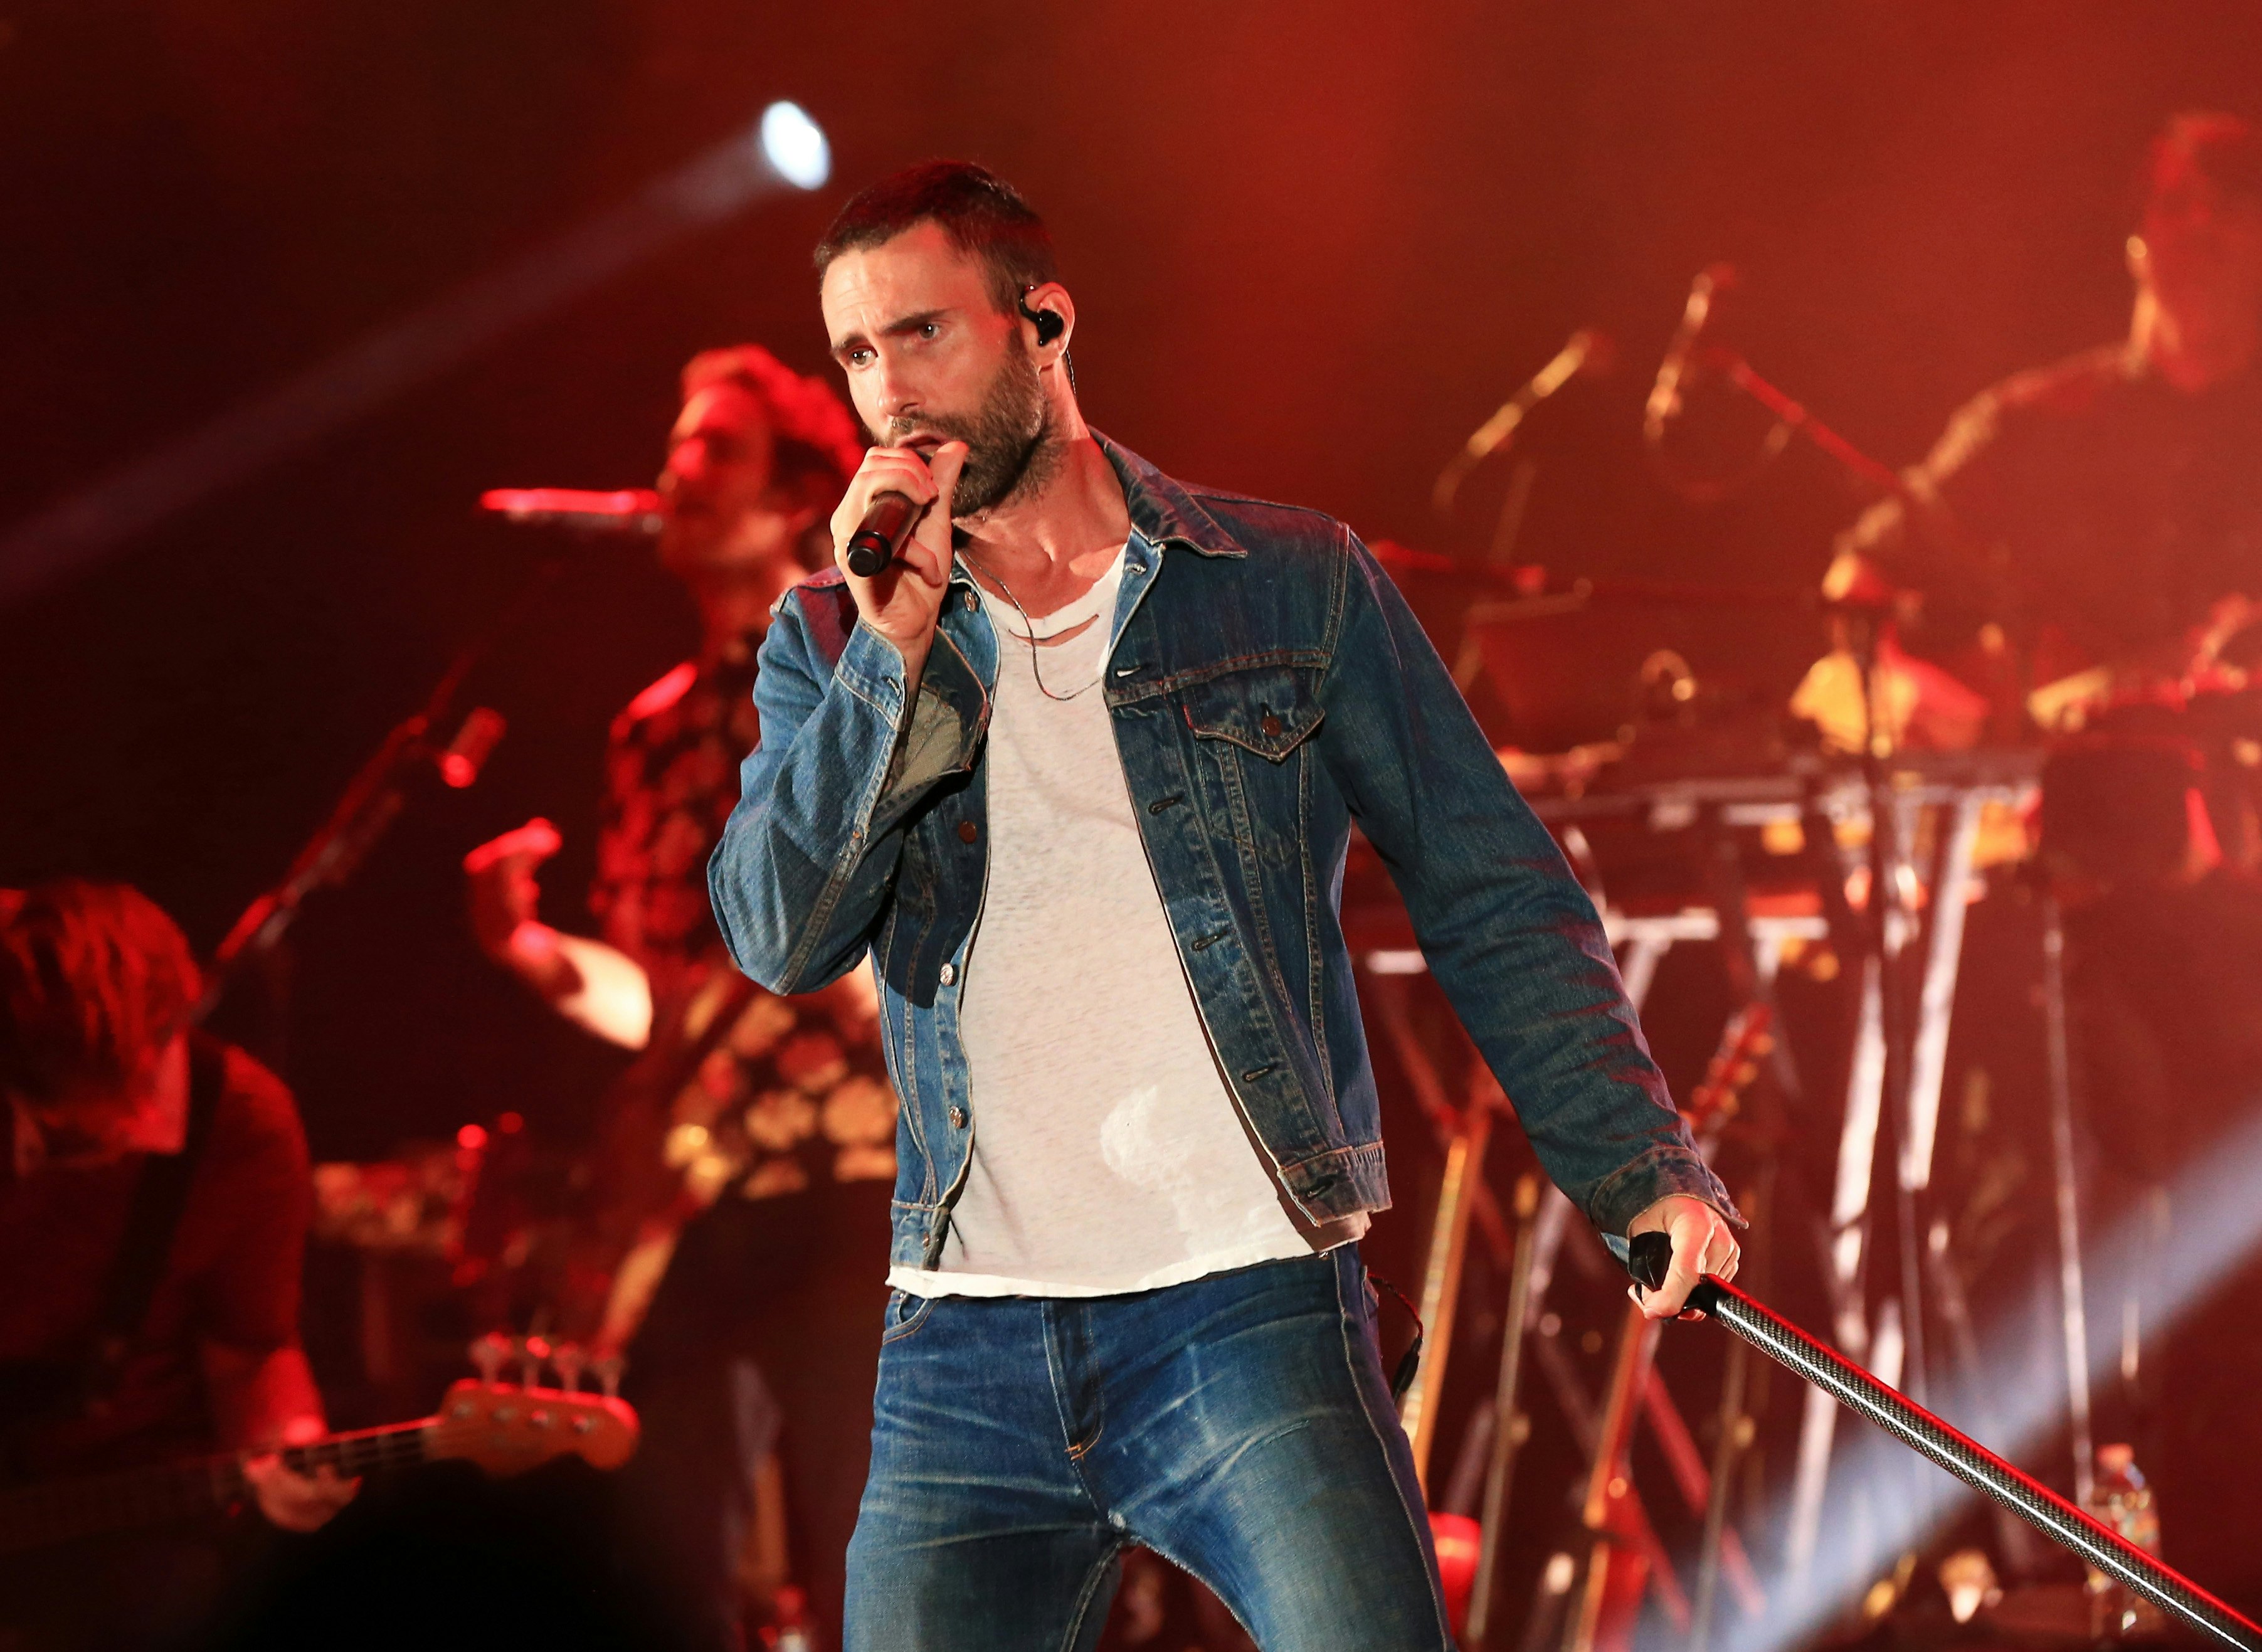 Maroon 5s Moves Like Jagger Lyrics Will Have You Dancing